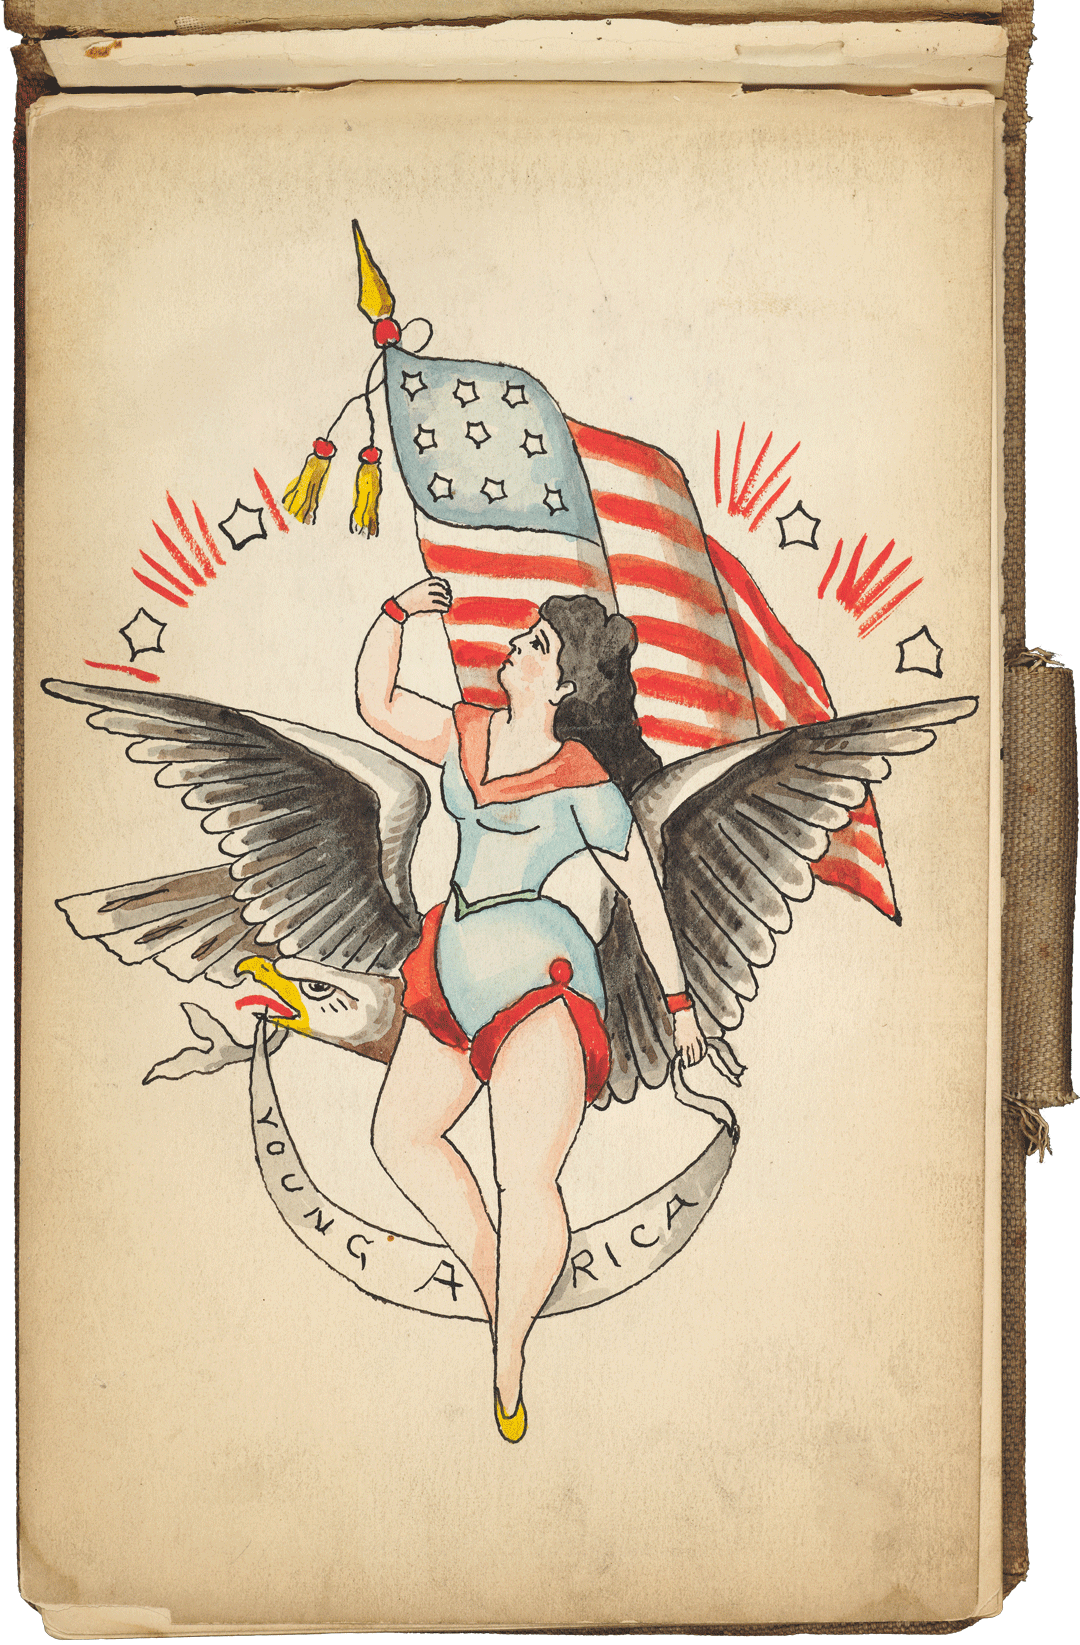 Concept art for a tattoo of a woman wearing a short dress in front of a bald eagle and the American flag with a banner reading "Young America" hanging from the eagle's mouth.